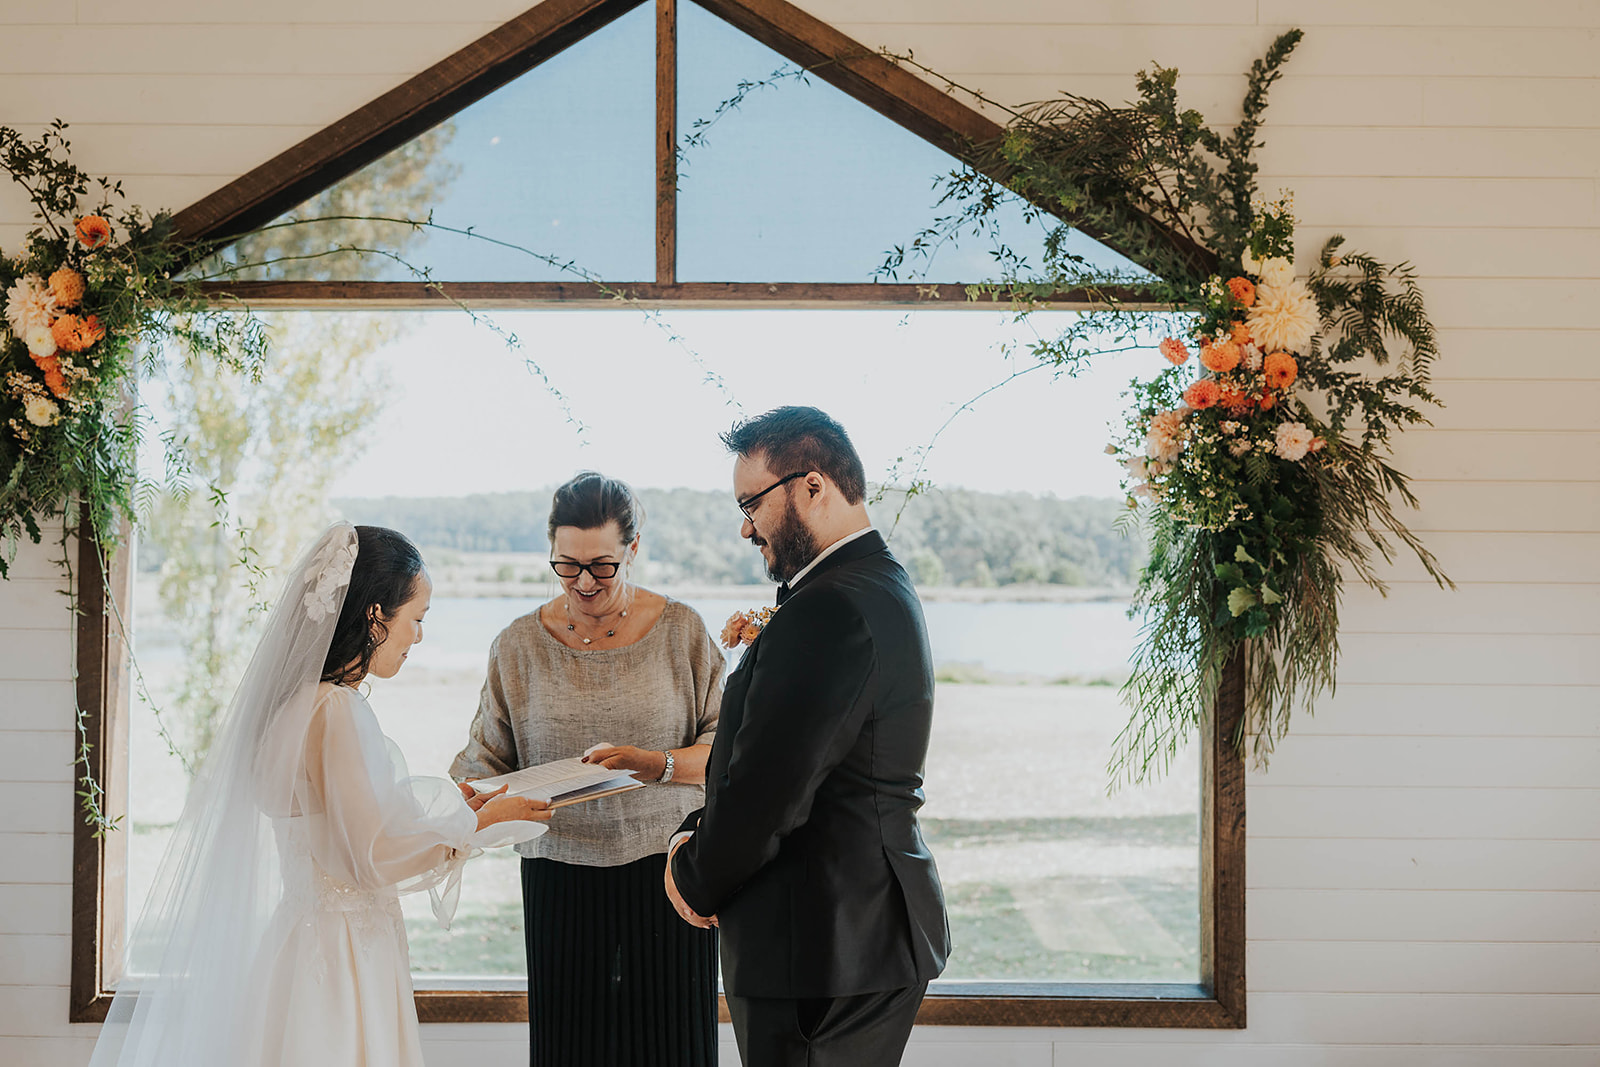 The bride and groom share their vows with their celebrant during an intimate ceremony at Sault, Daylesford.